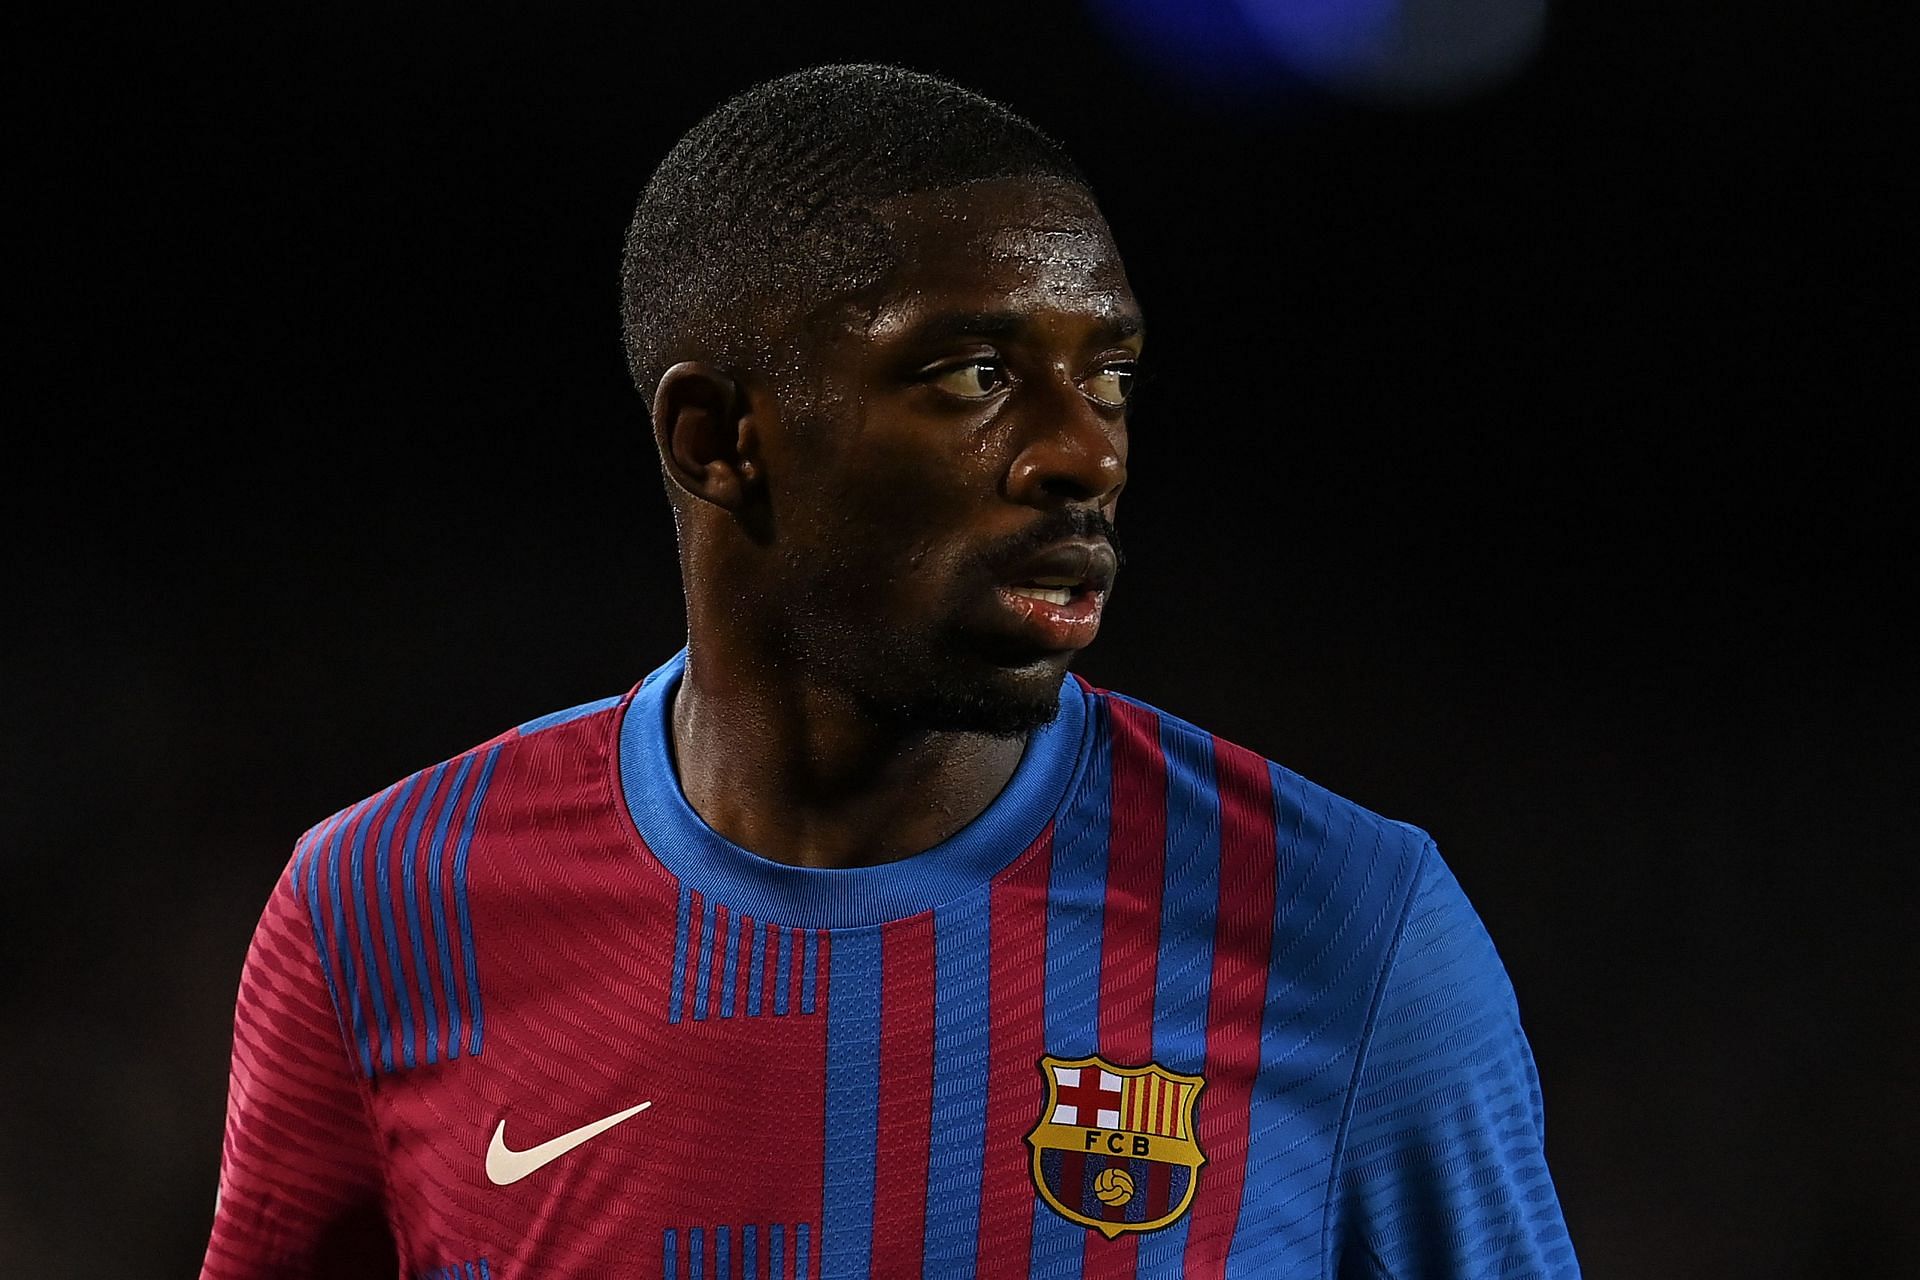 Ousmane Dembele could secure a move to the Parc des Princes this summer.